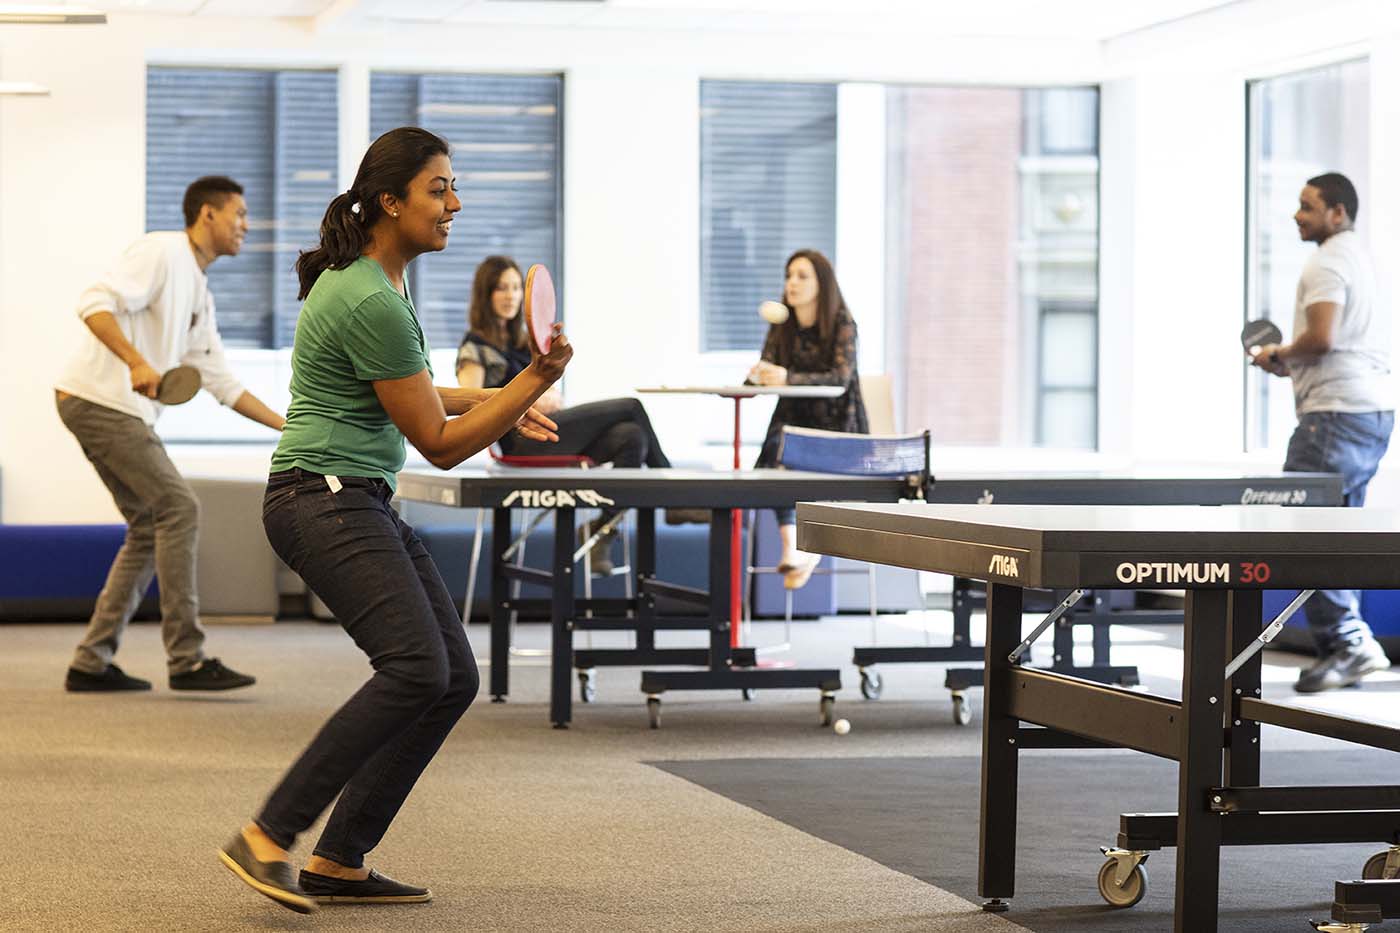 Employees take a break and enjoy a game of table tennis